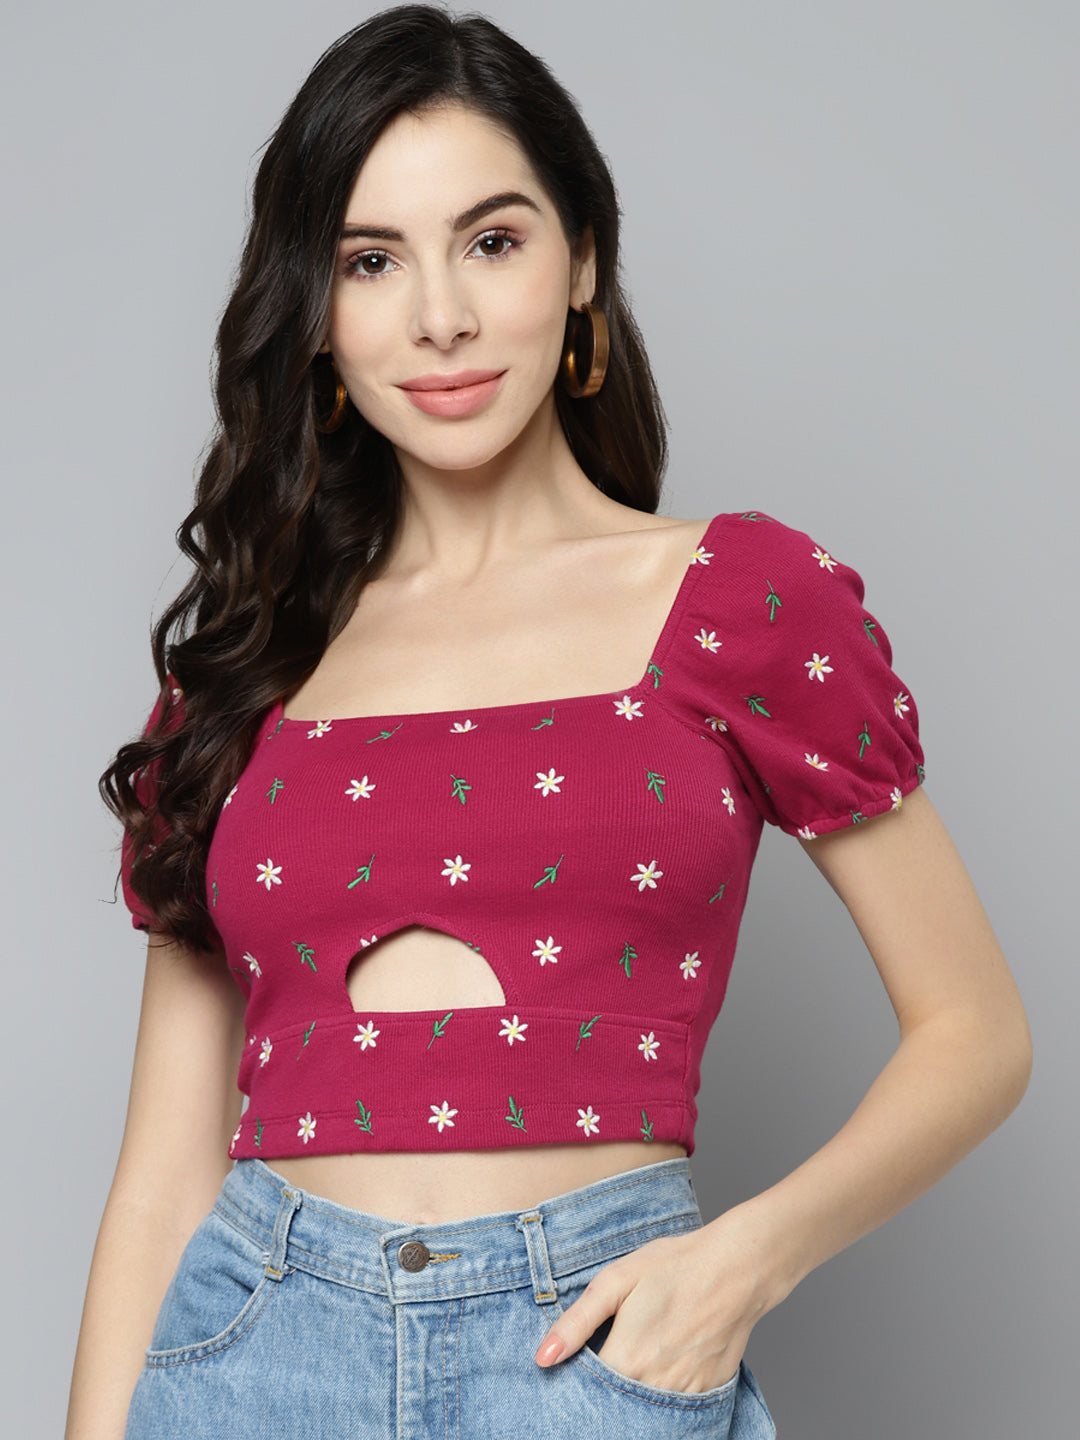 Burgundy & White Floral Embroidered Crop Top